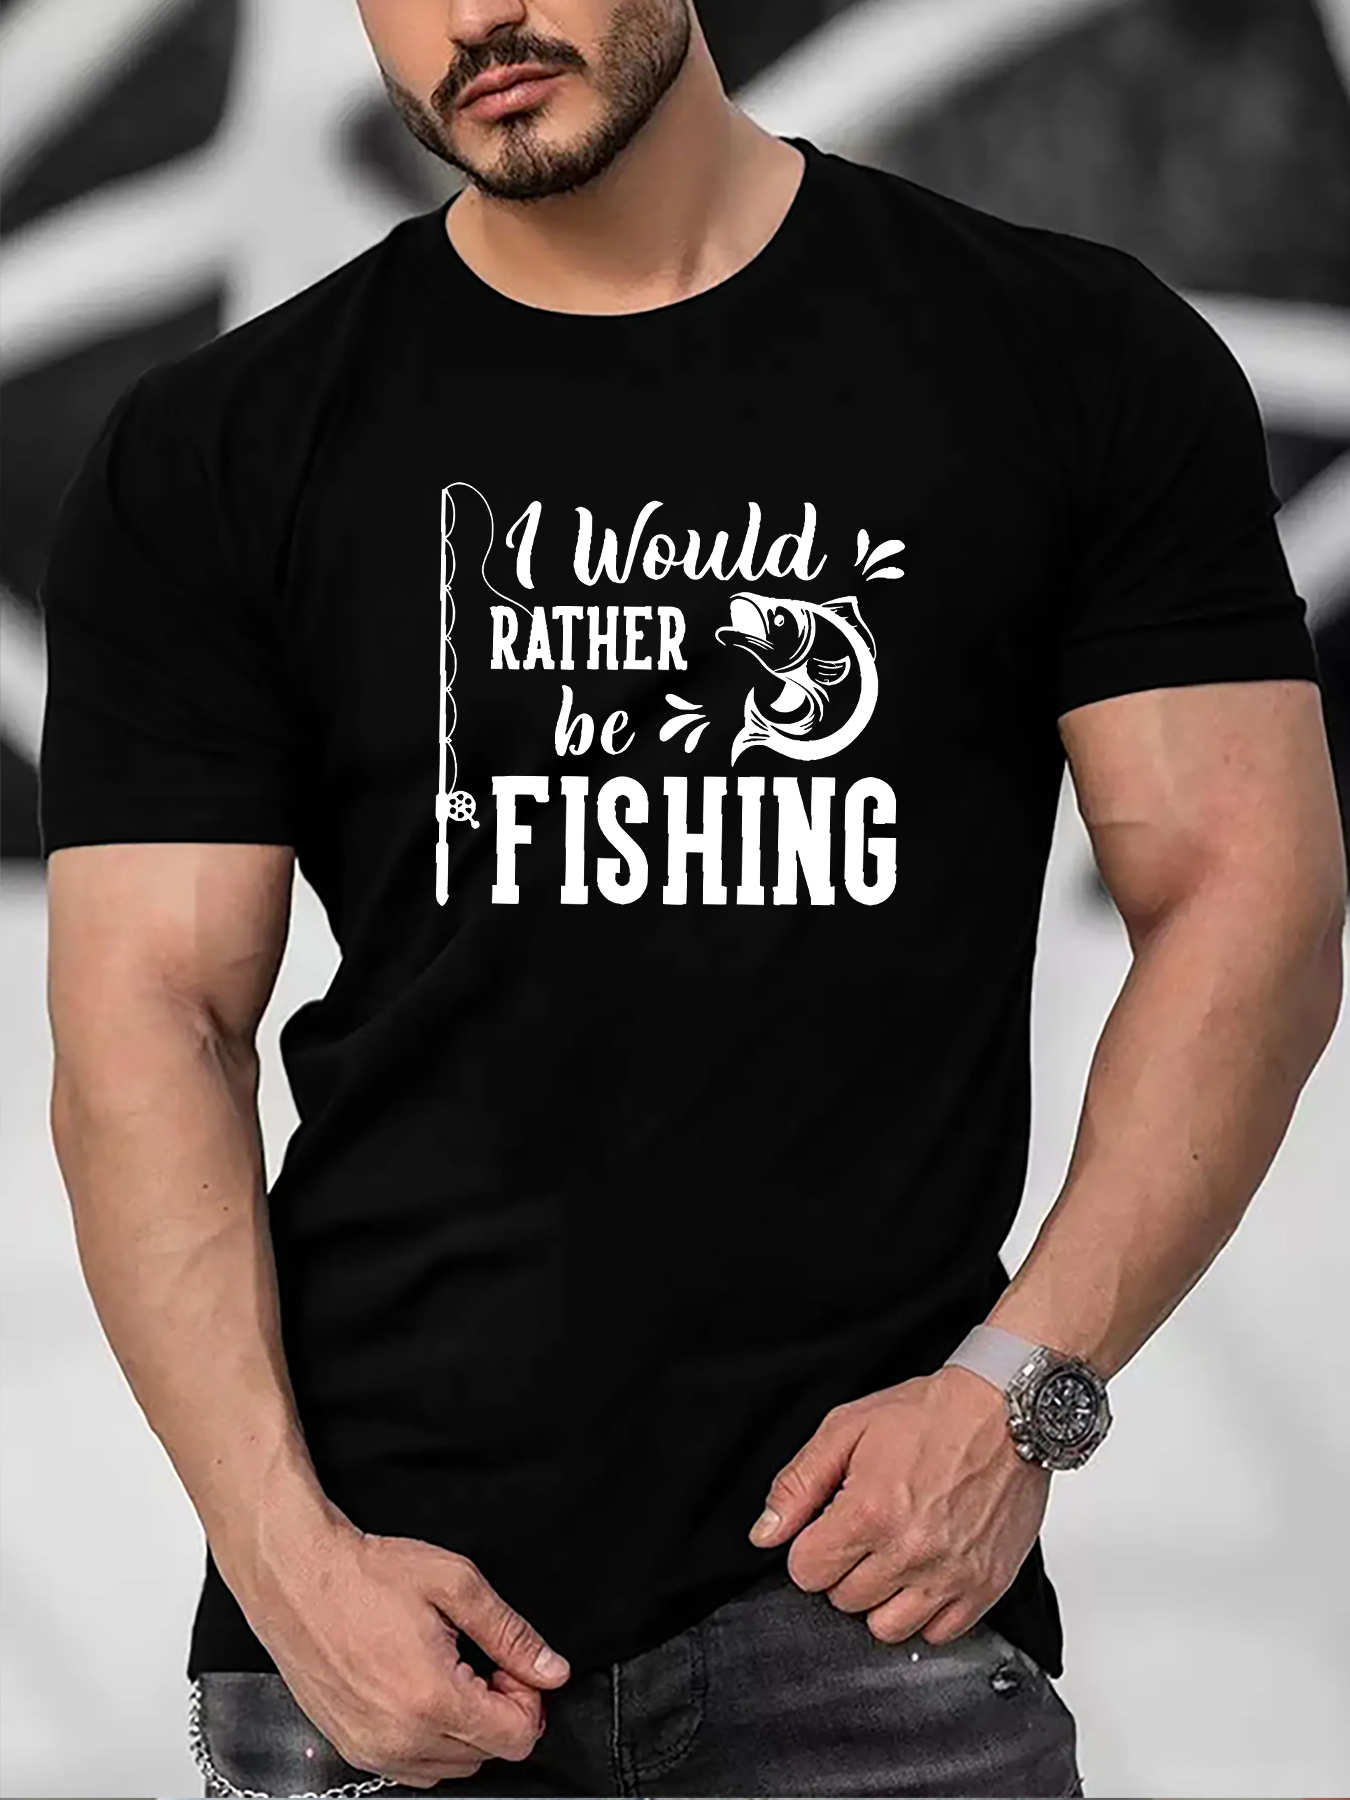 Print Crew Neck Short Sleeve T-Shirt, Men's Slight Stretch Casual Summer Funny Fishing Letter Pattern Comfy Graphic Tee Outdoor Clothes Clothing